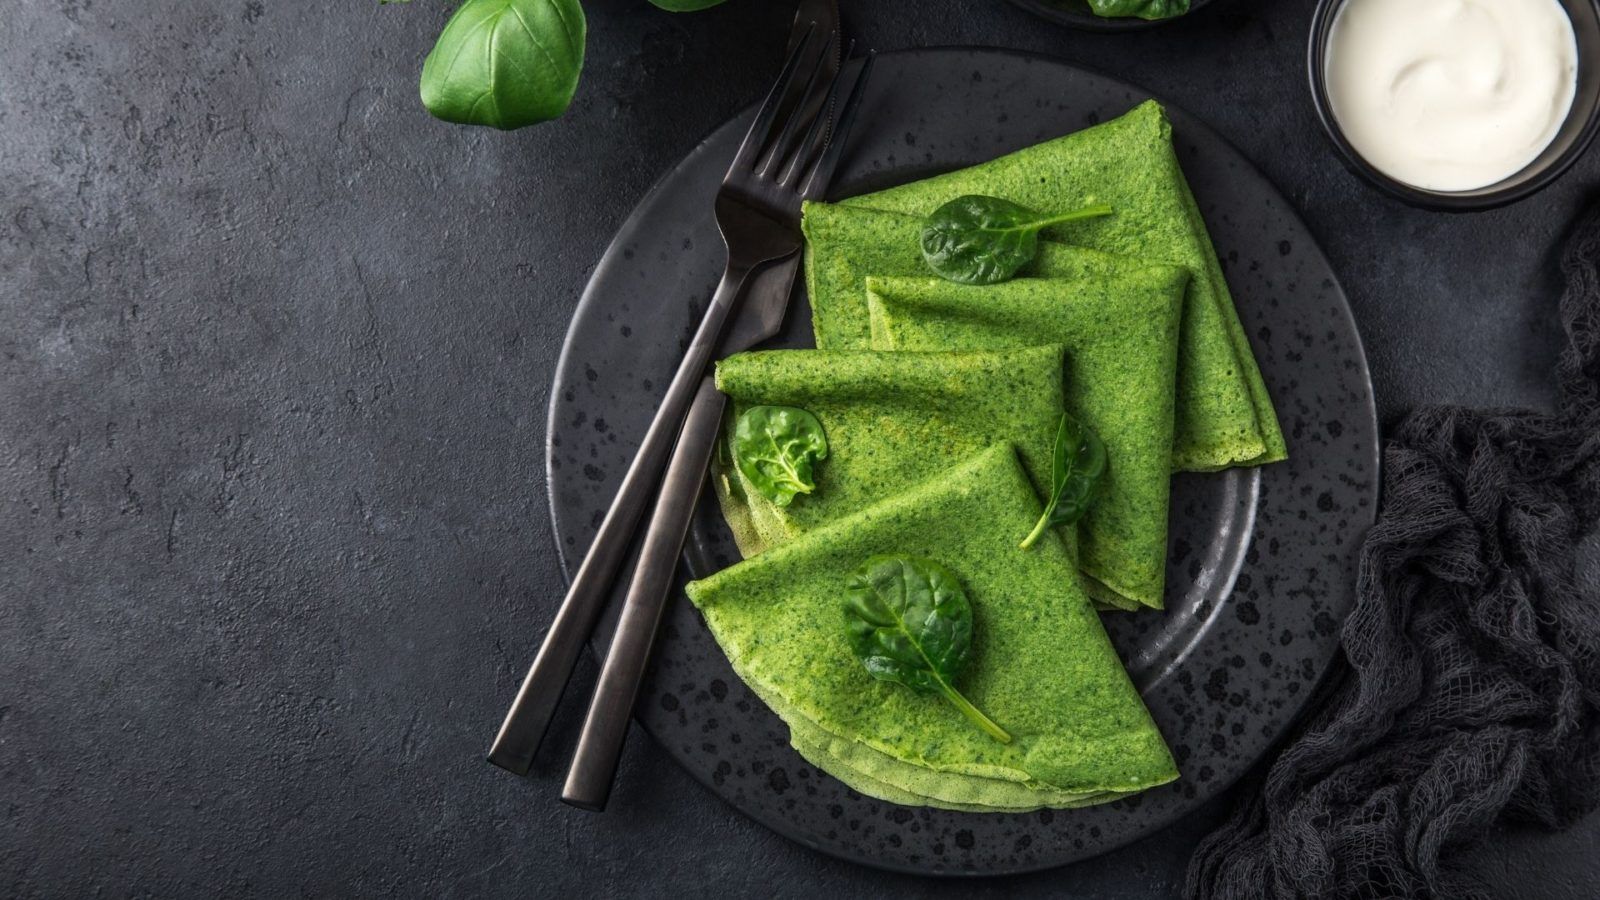 10 delicious spinach recipes that make eating greens fun